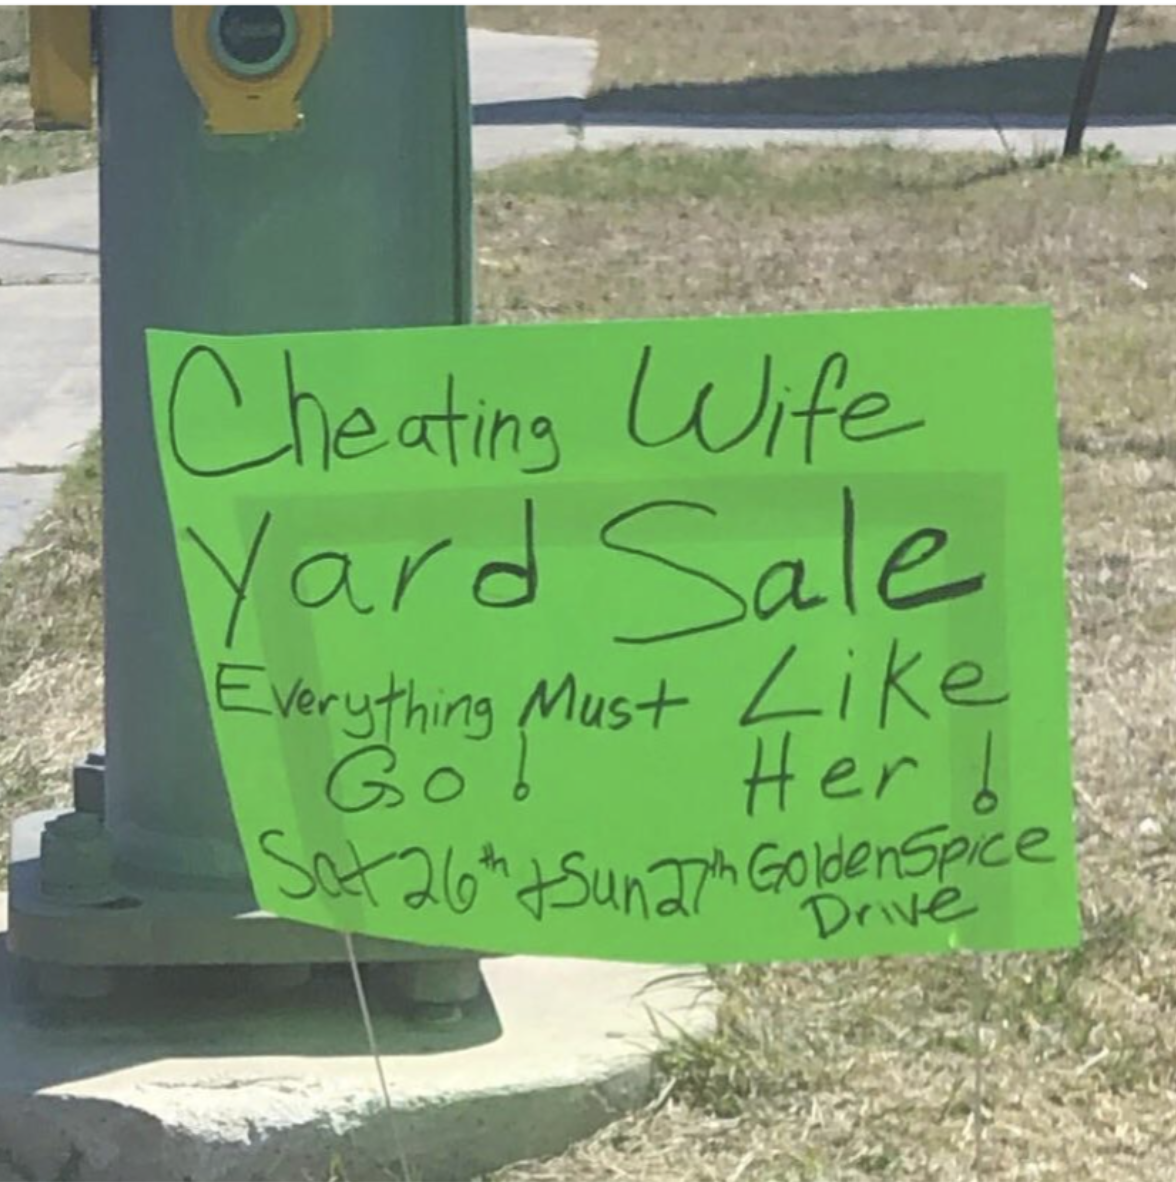 &quot;Cheating Wife Yard Sale&quot;